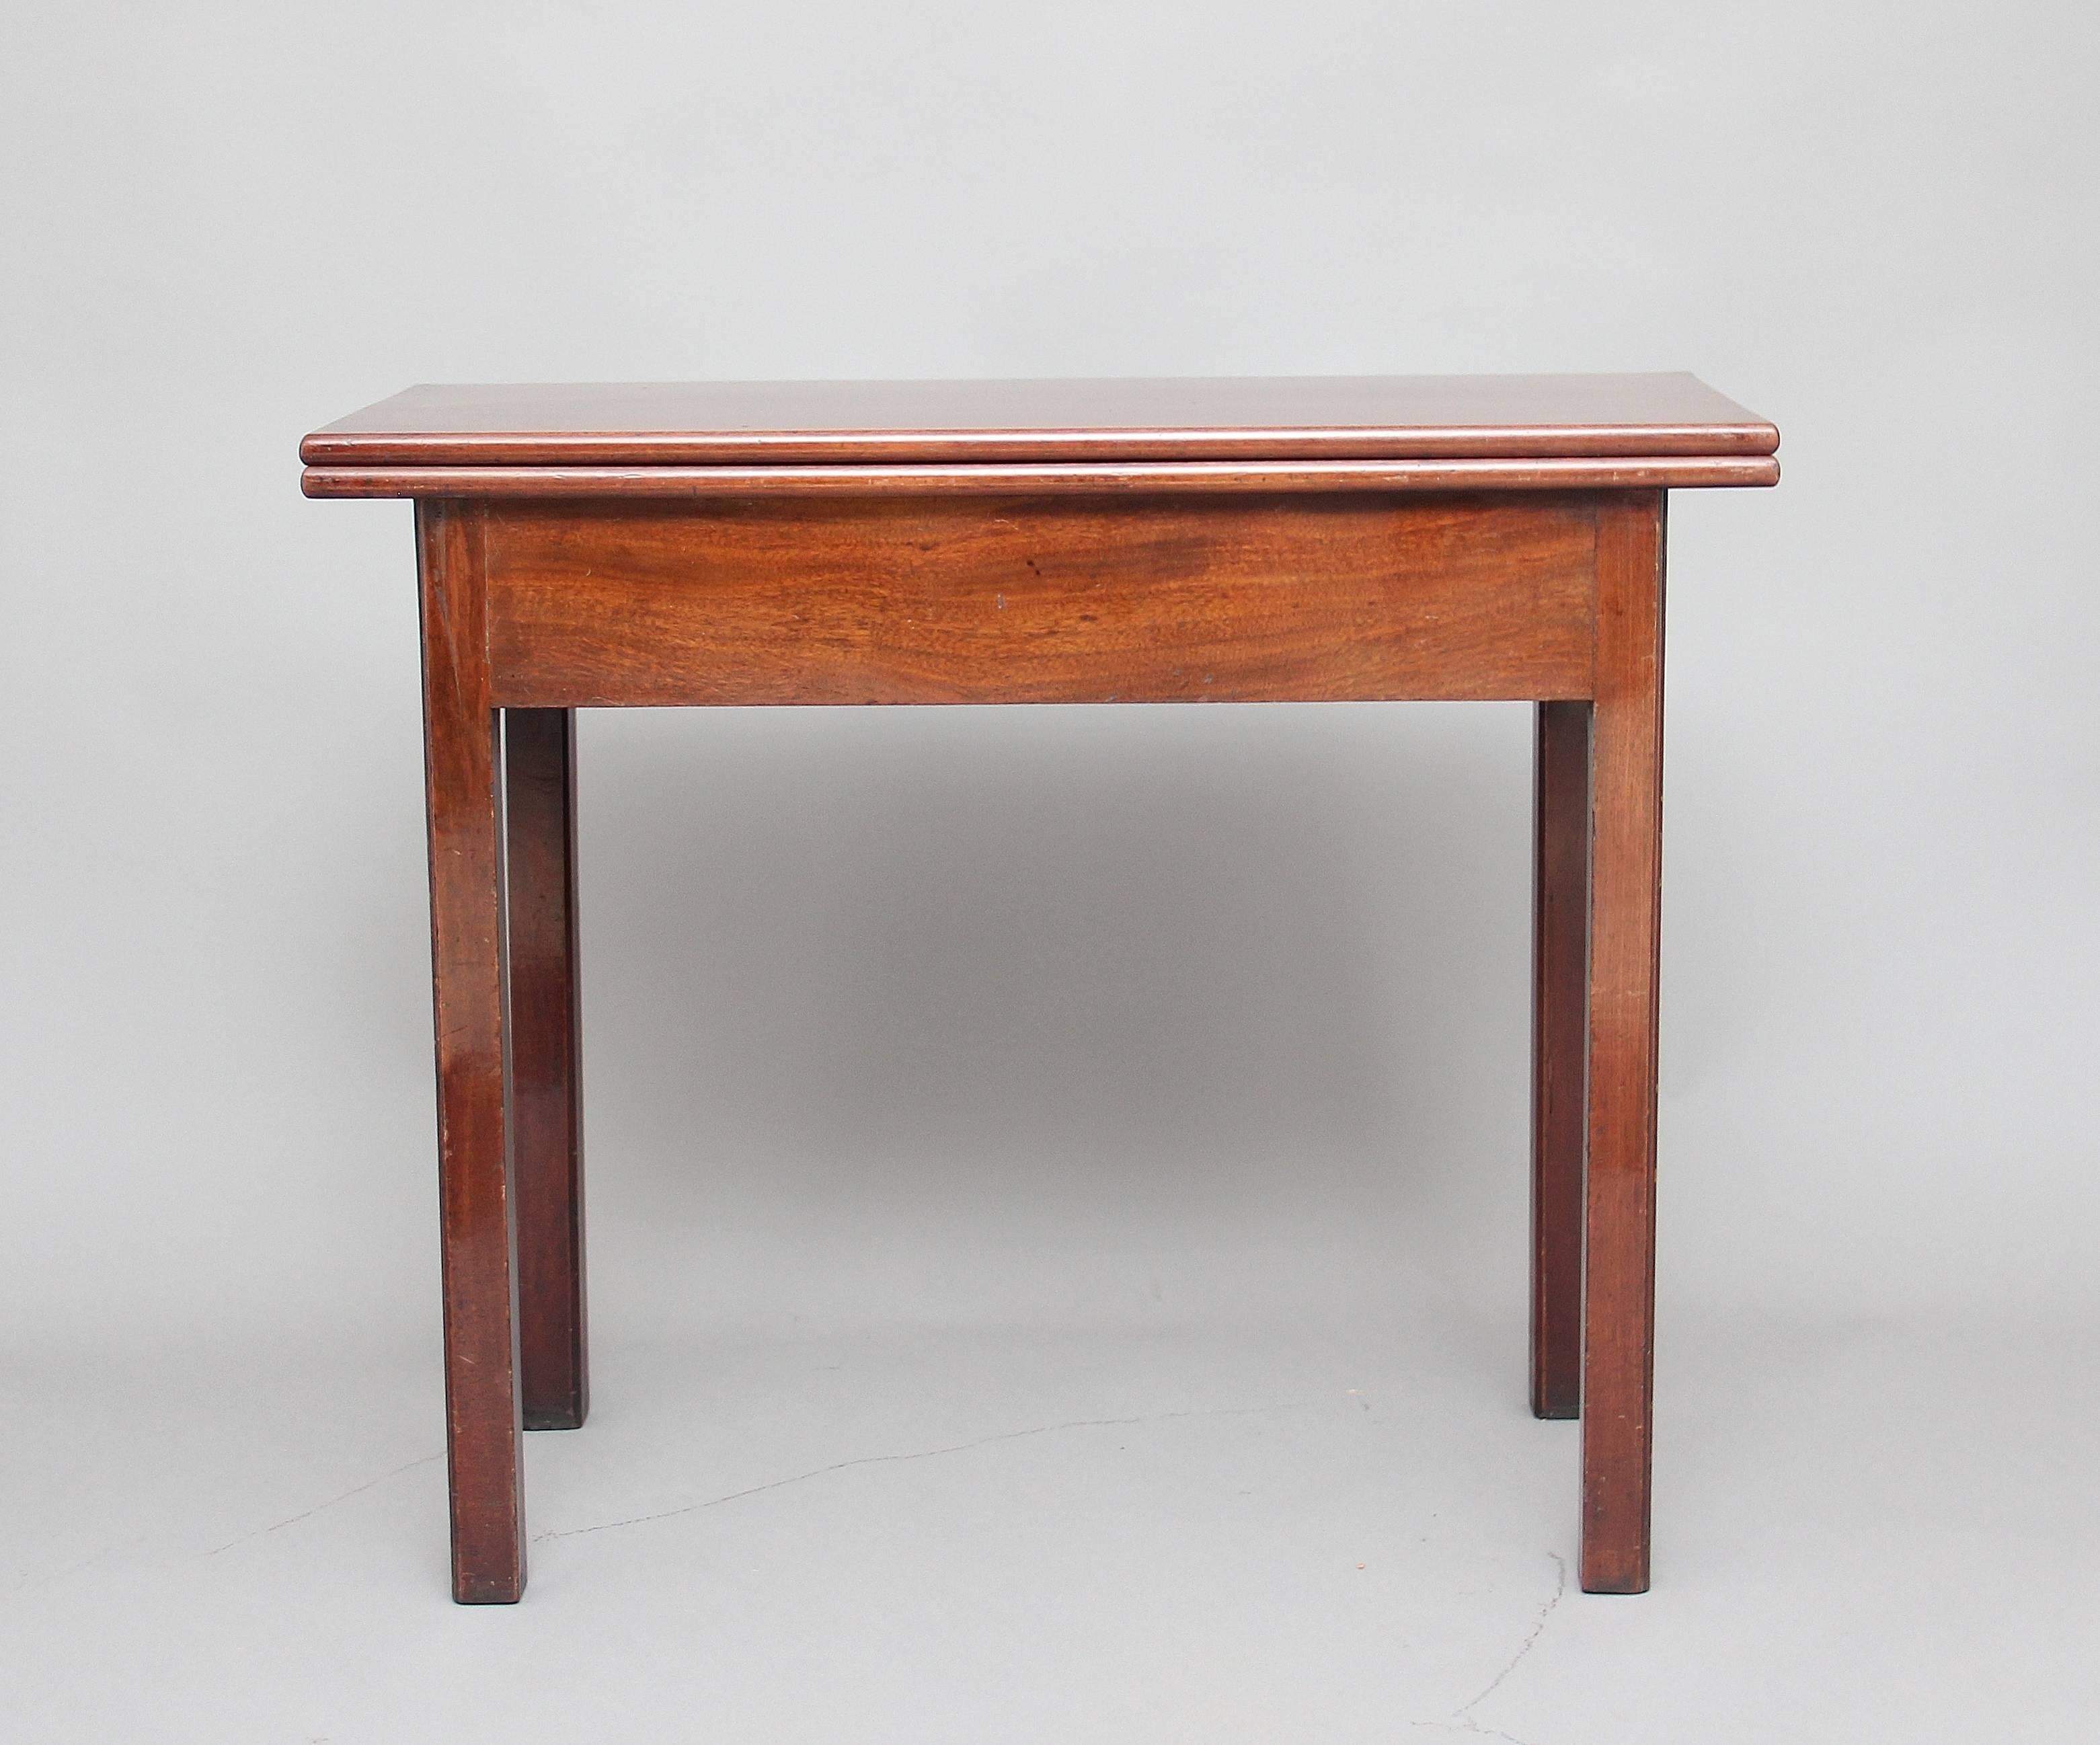 18th century mahogany tea or side table, the back leg pulling out to support the hinged rectangular top to form a square tea table, circa 1780.


Measures: Height 29